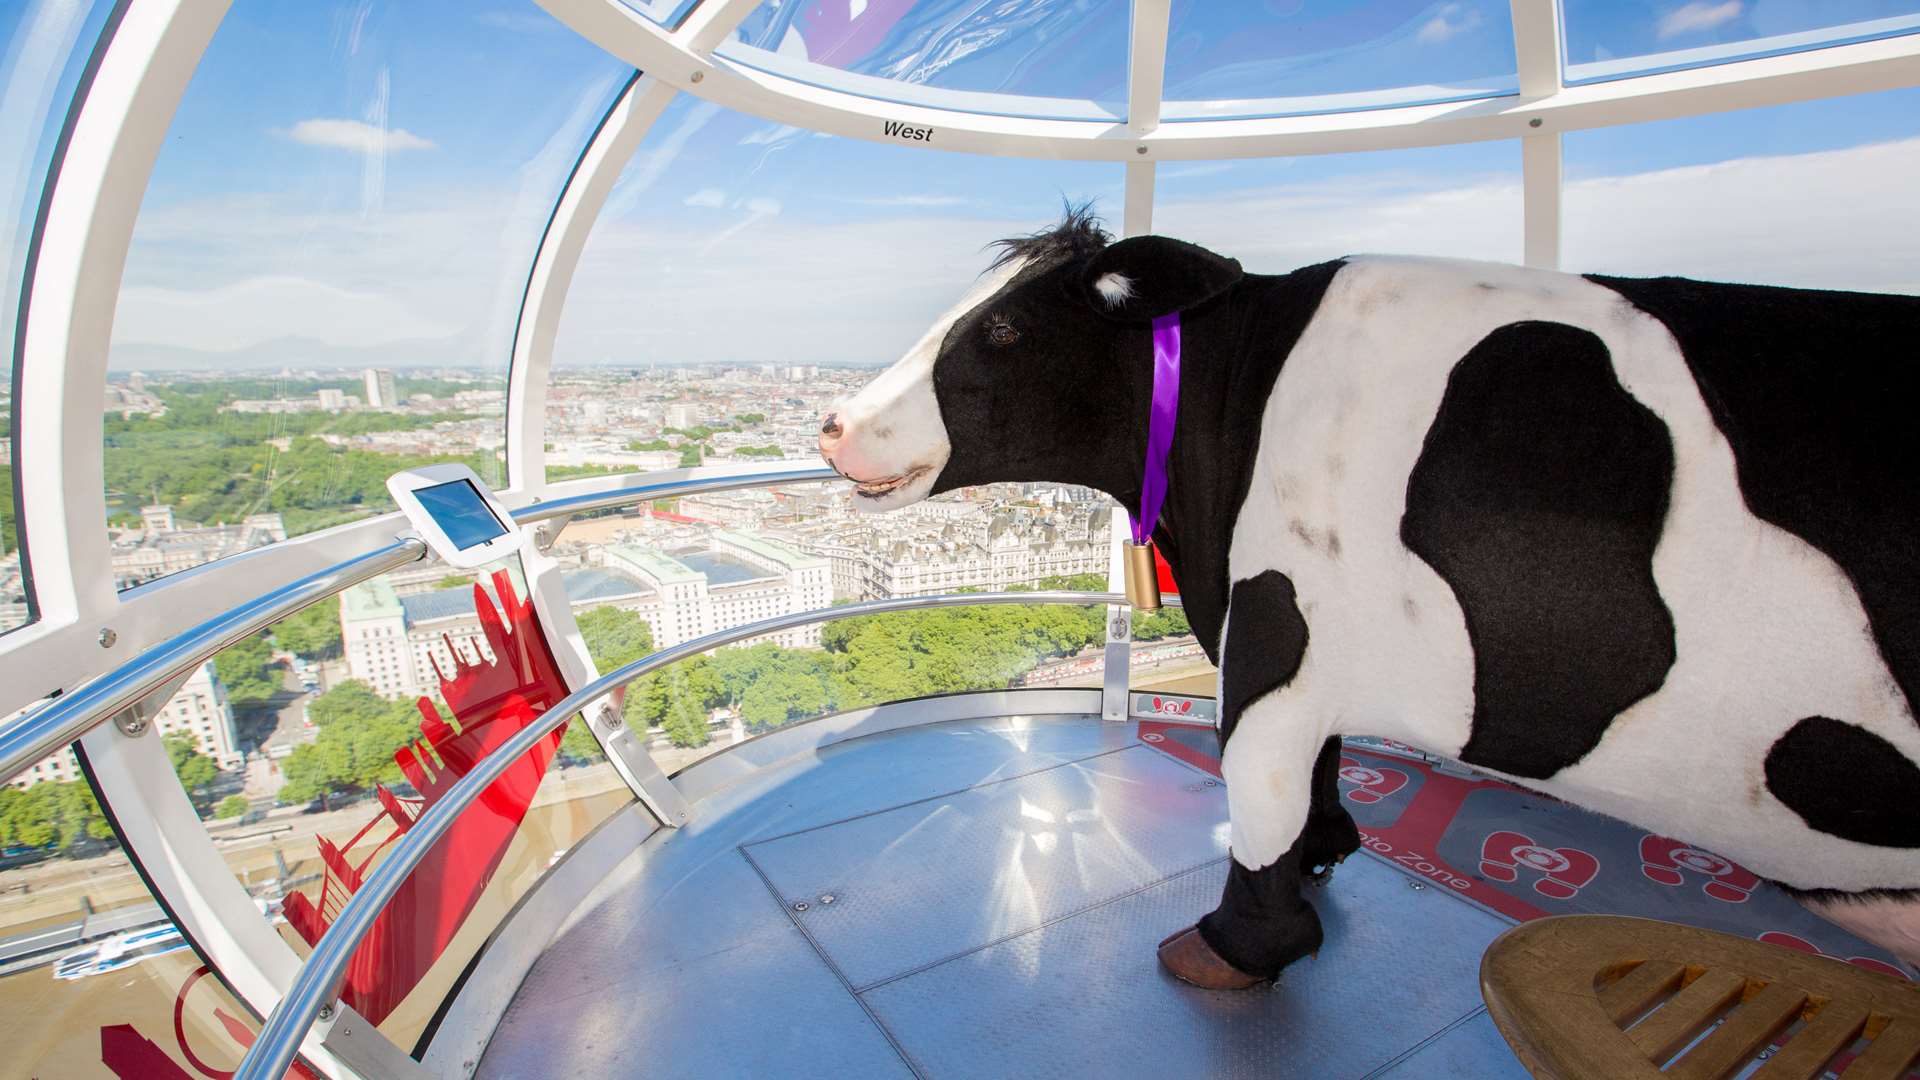 The Cadbury animatronic cow hitches a ride on the London Eye